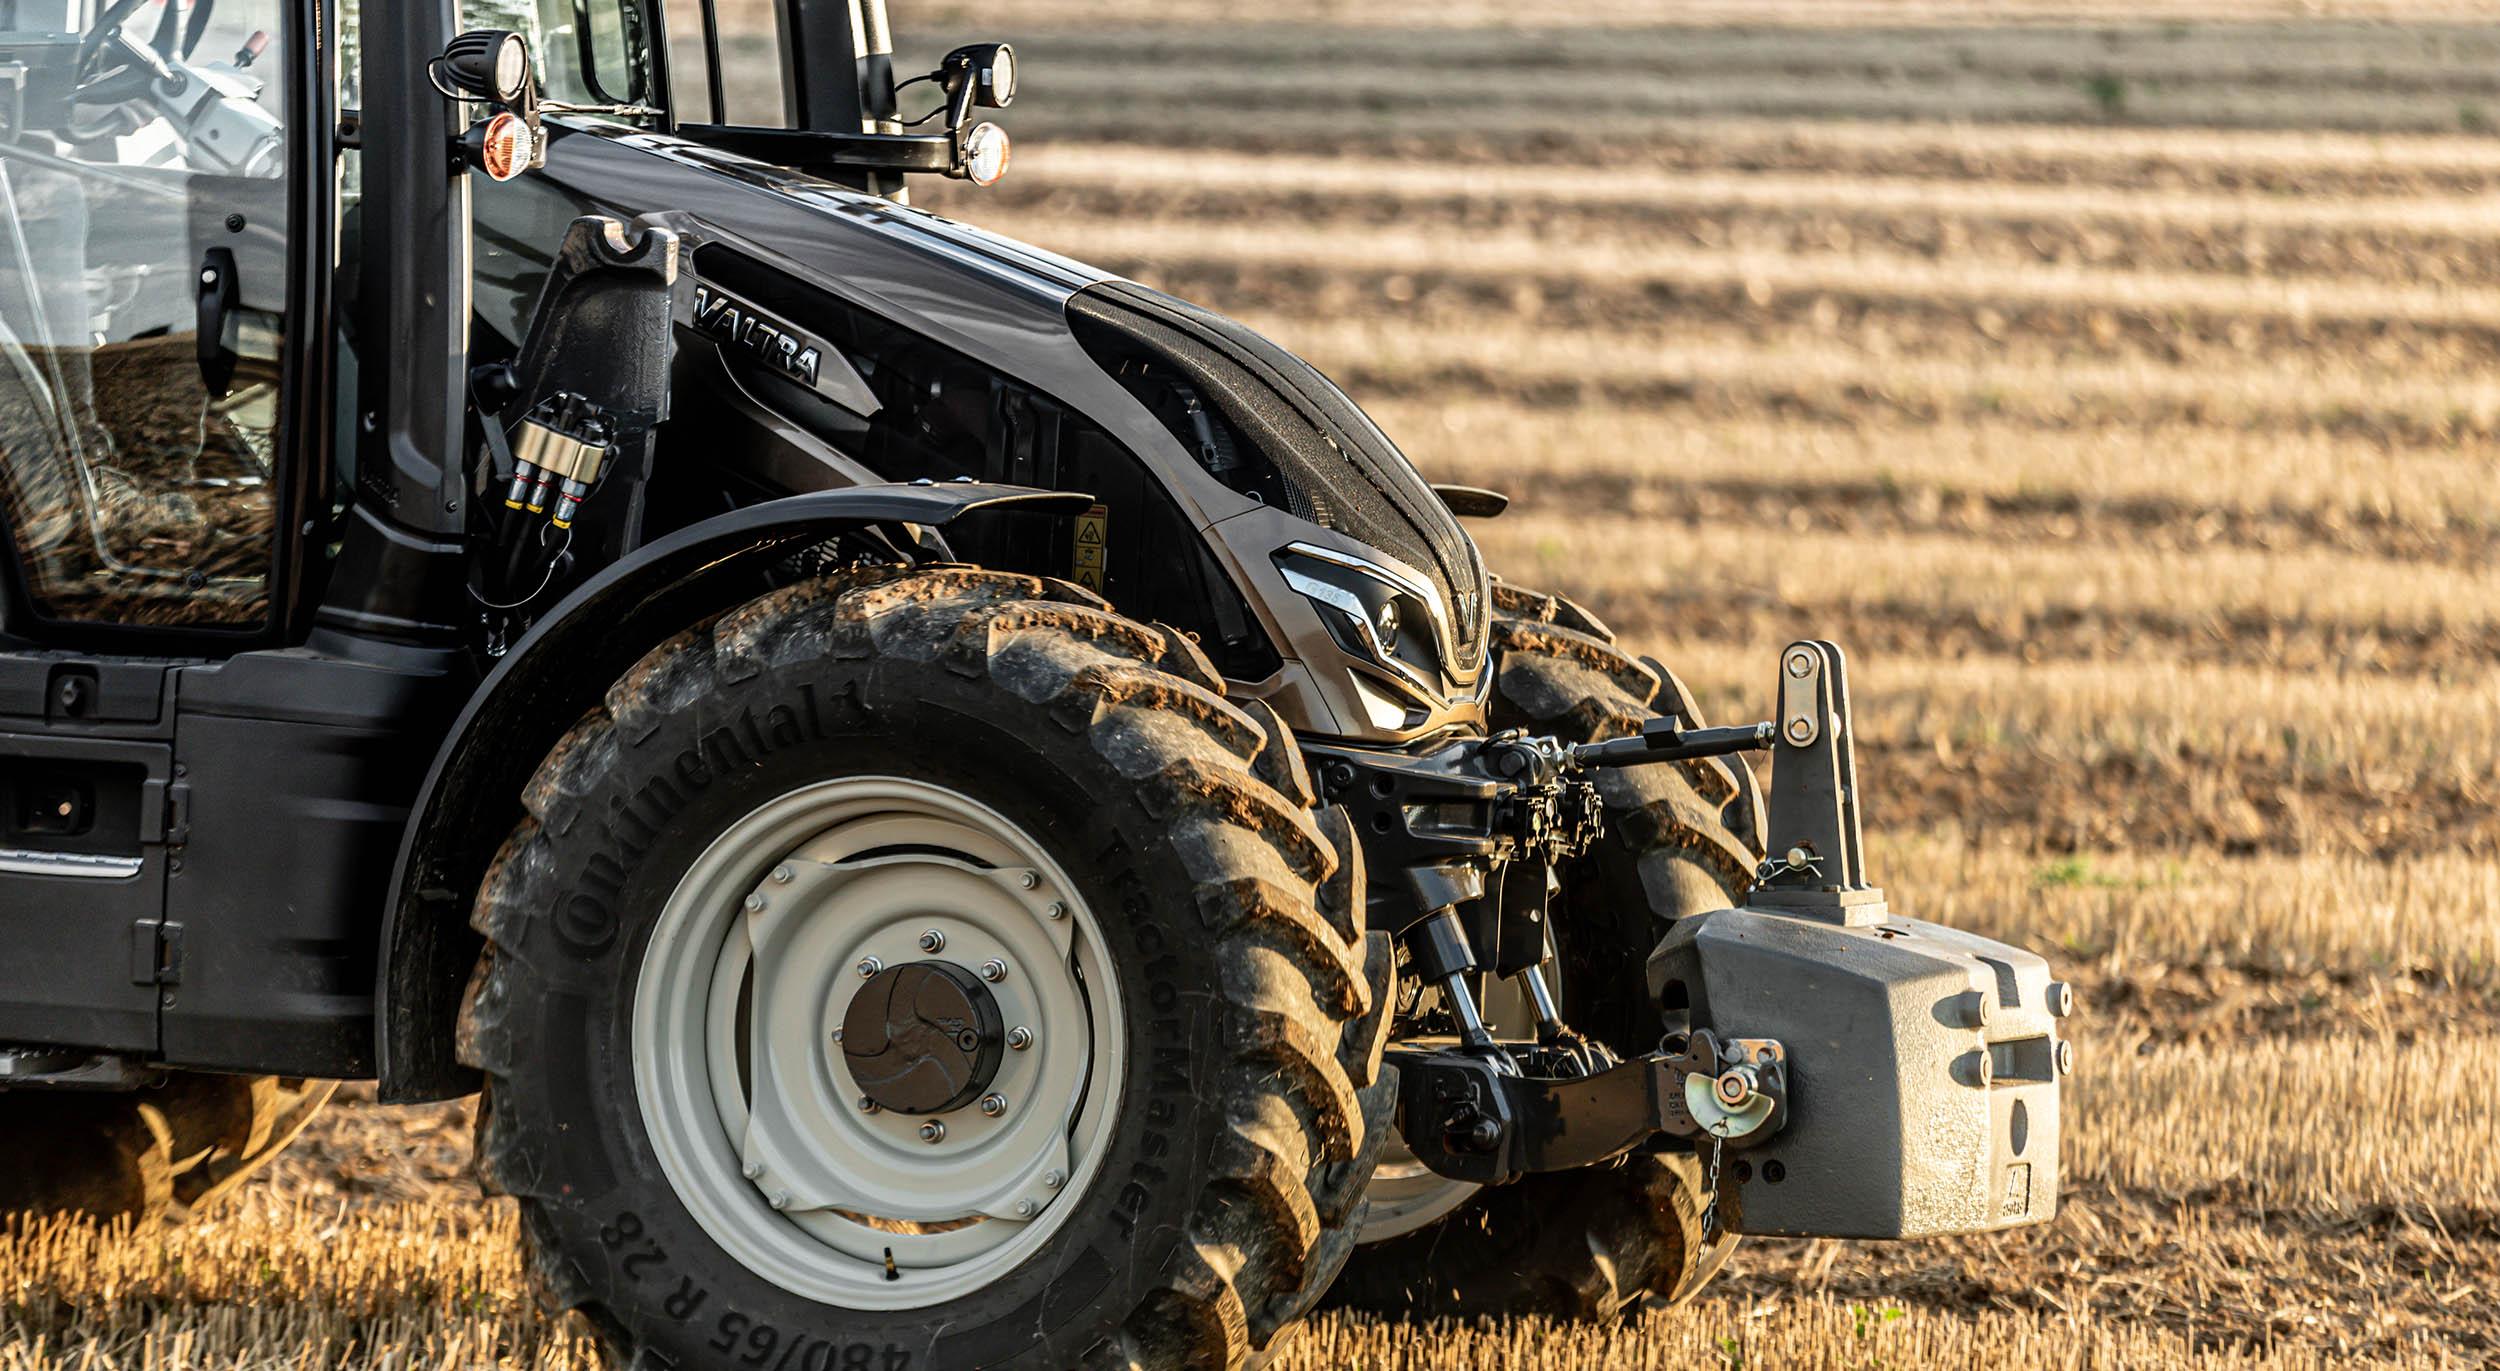 Servitization leads to the shift to using products such as this Valtra G5 instead of owning them.